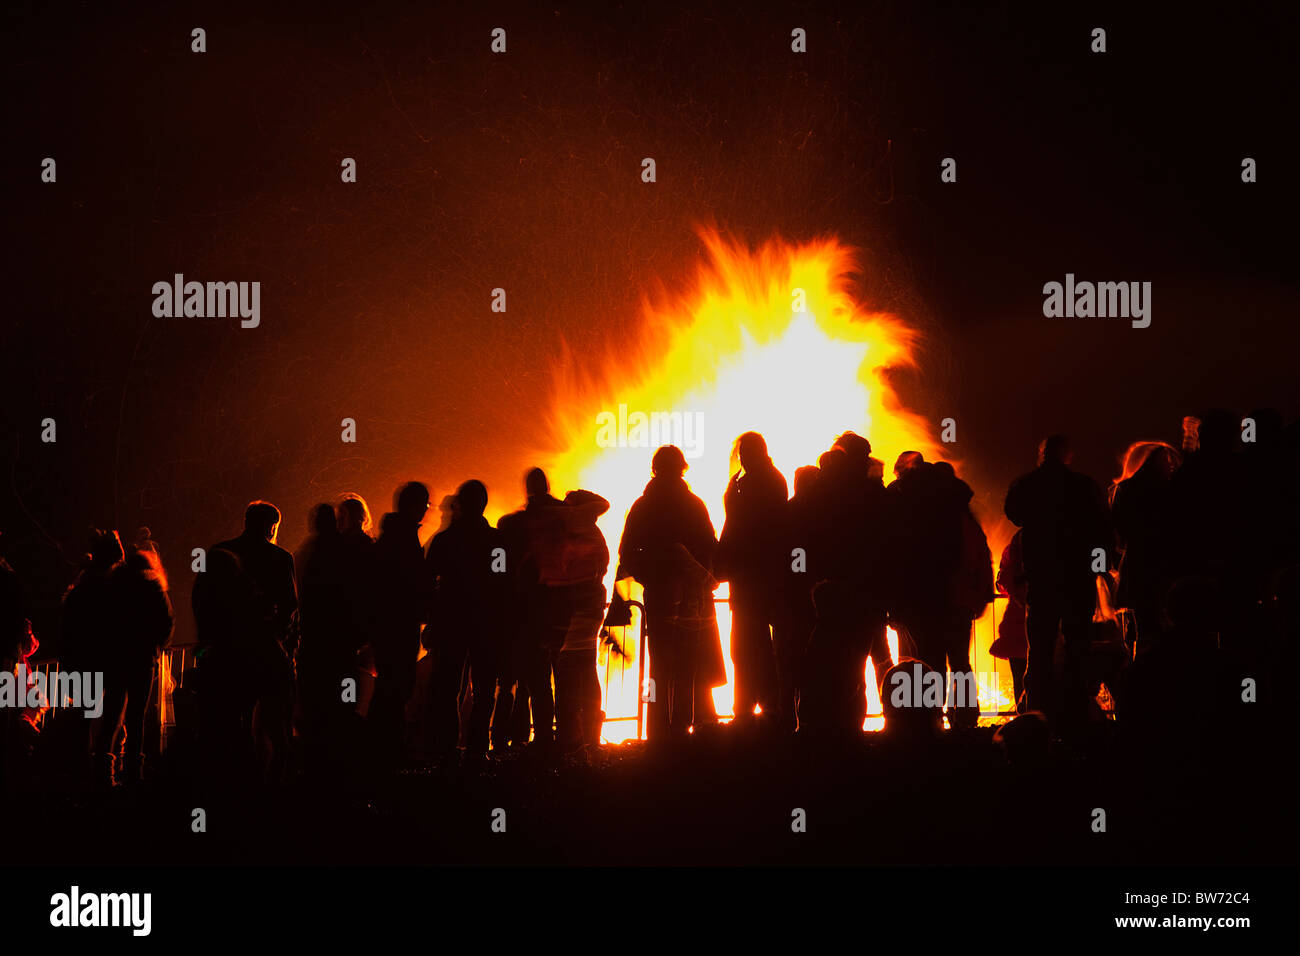 Festivals, Guy Fawkes, Bonfire, People silhouetted by flames from fire on the beach. Stock Photo